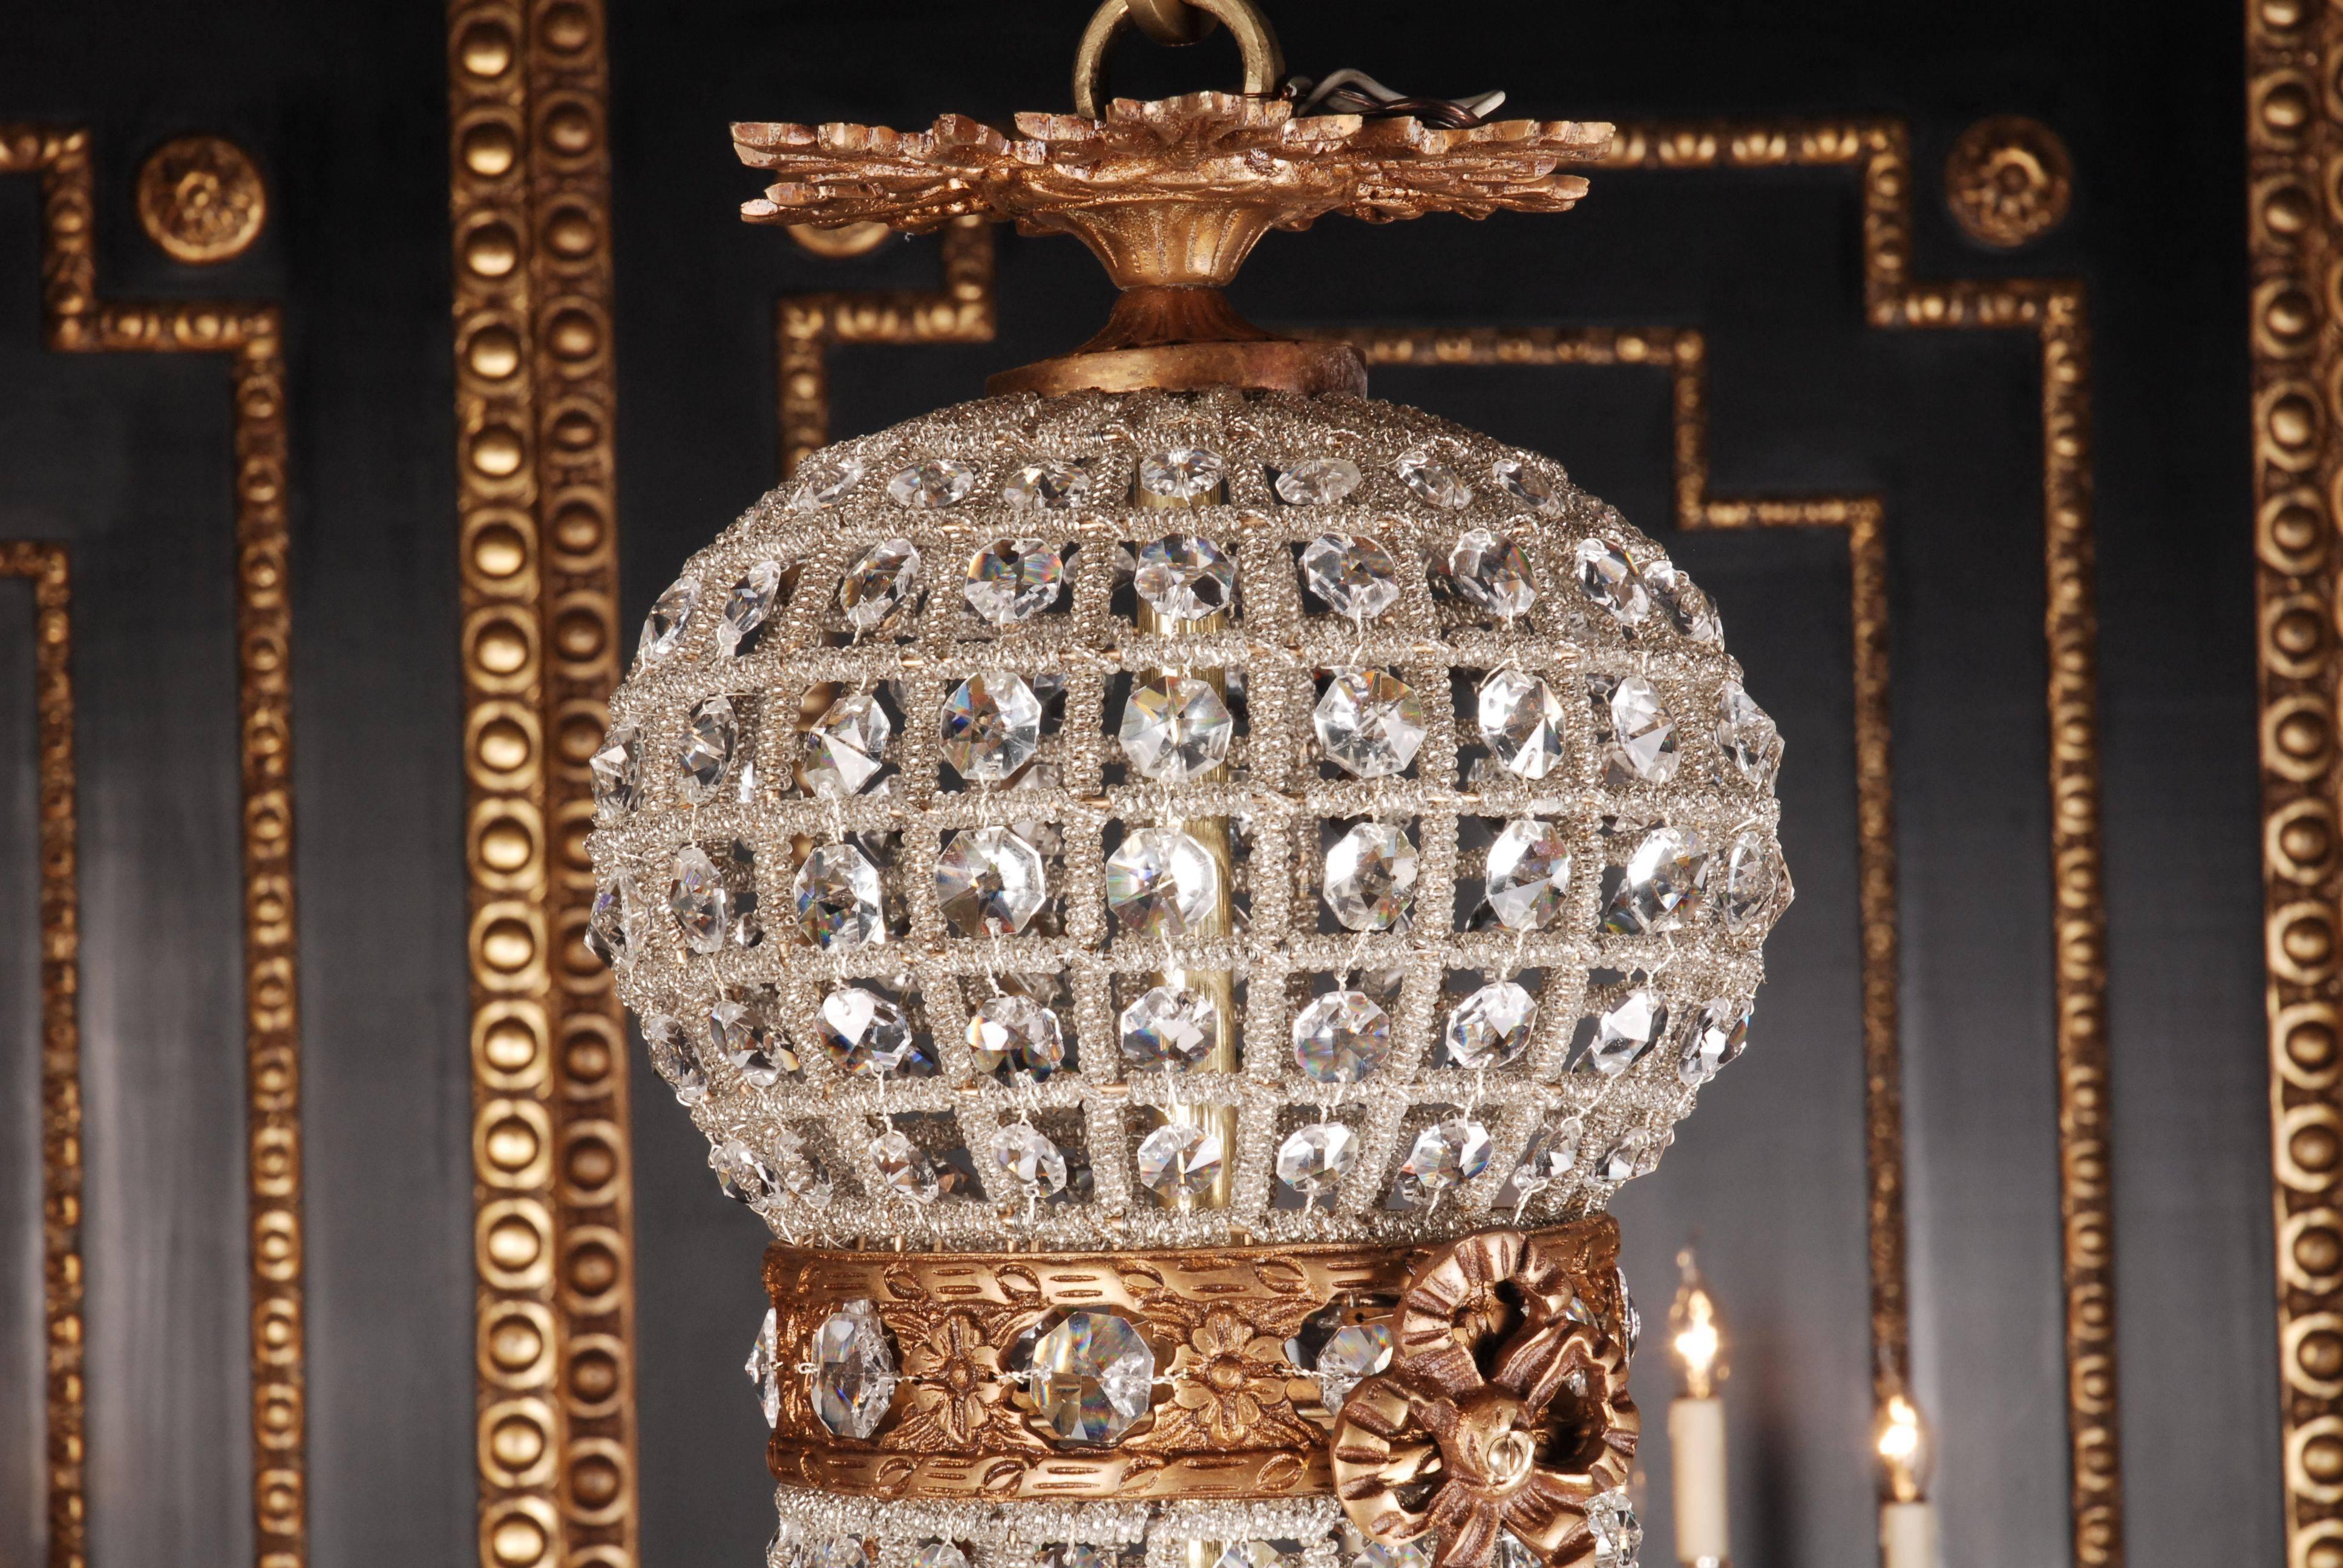 Classical basket candelabra in Biedermeier style.
Finely engraved bronze. Net grid with hand ground crystal stones.

(F-Me-2).